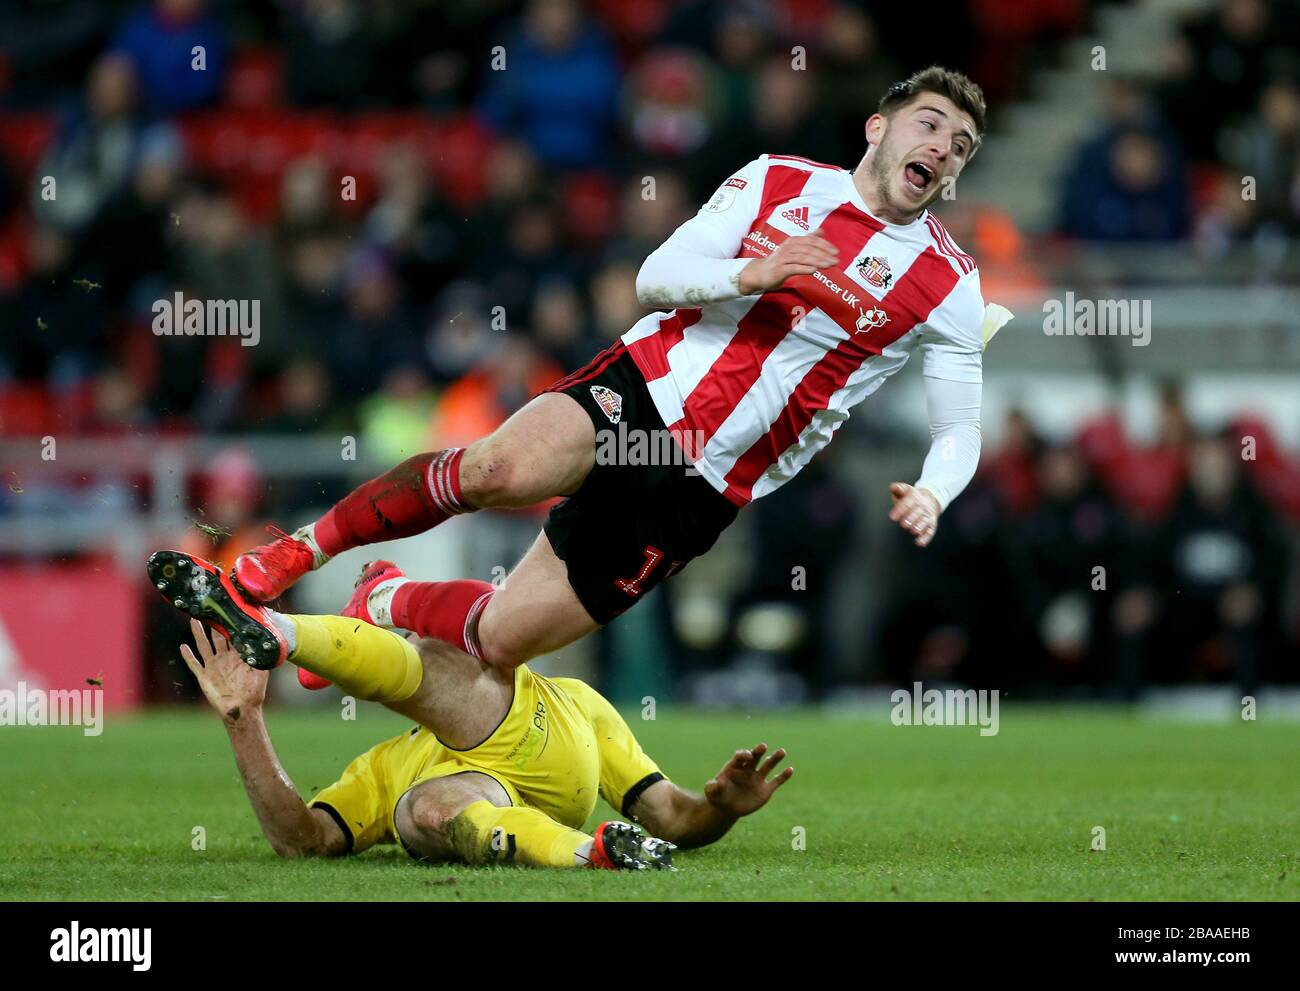 Sunderland's Lynden Gooch is tackled by Fleetwood Town's Lewis Coyle Stock Photo